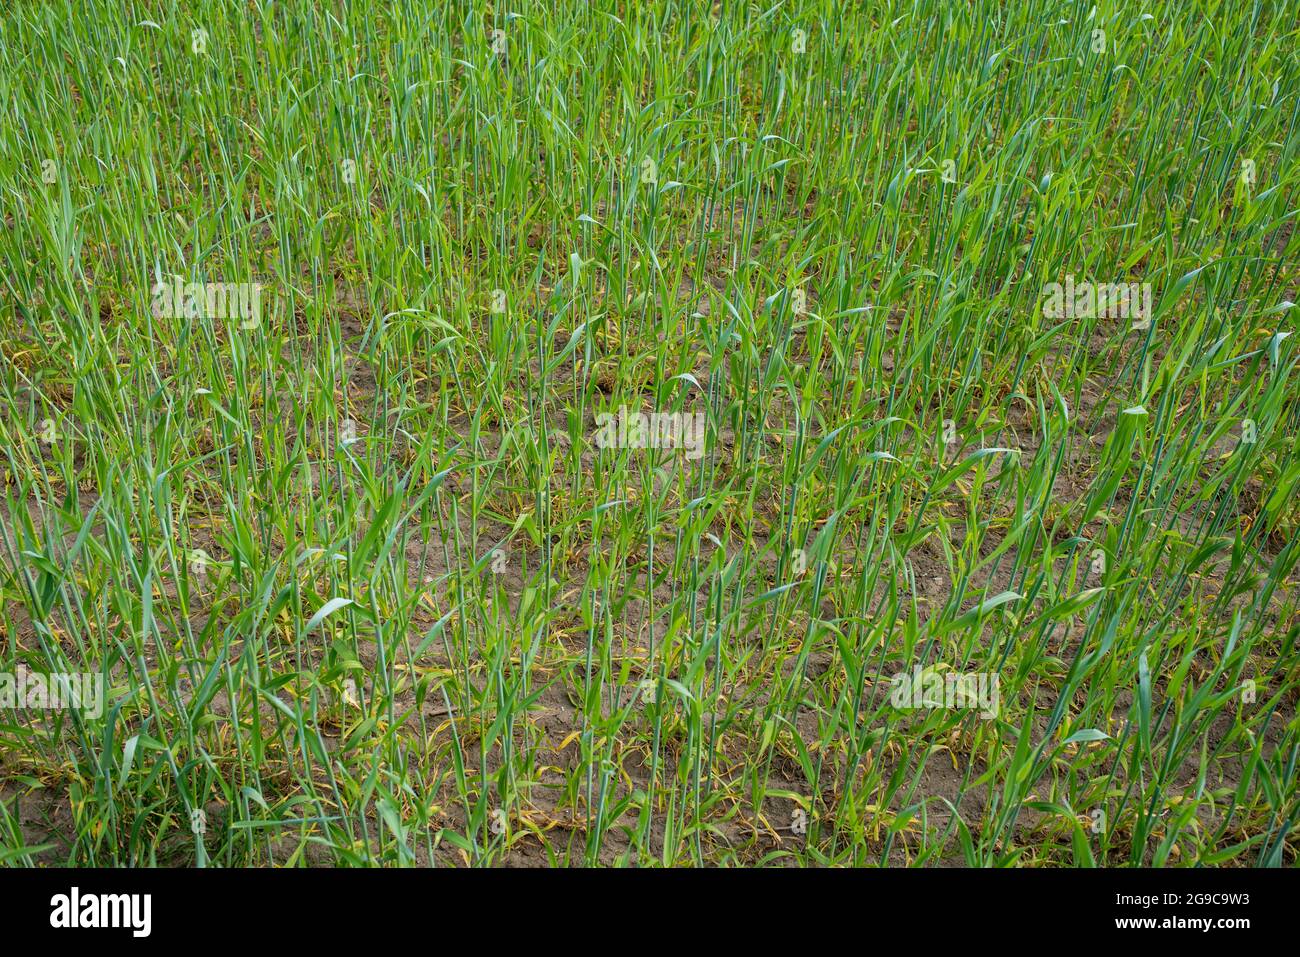 Young wheat plants on a field in Europe in spring Stock Photo